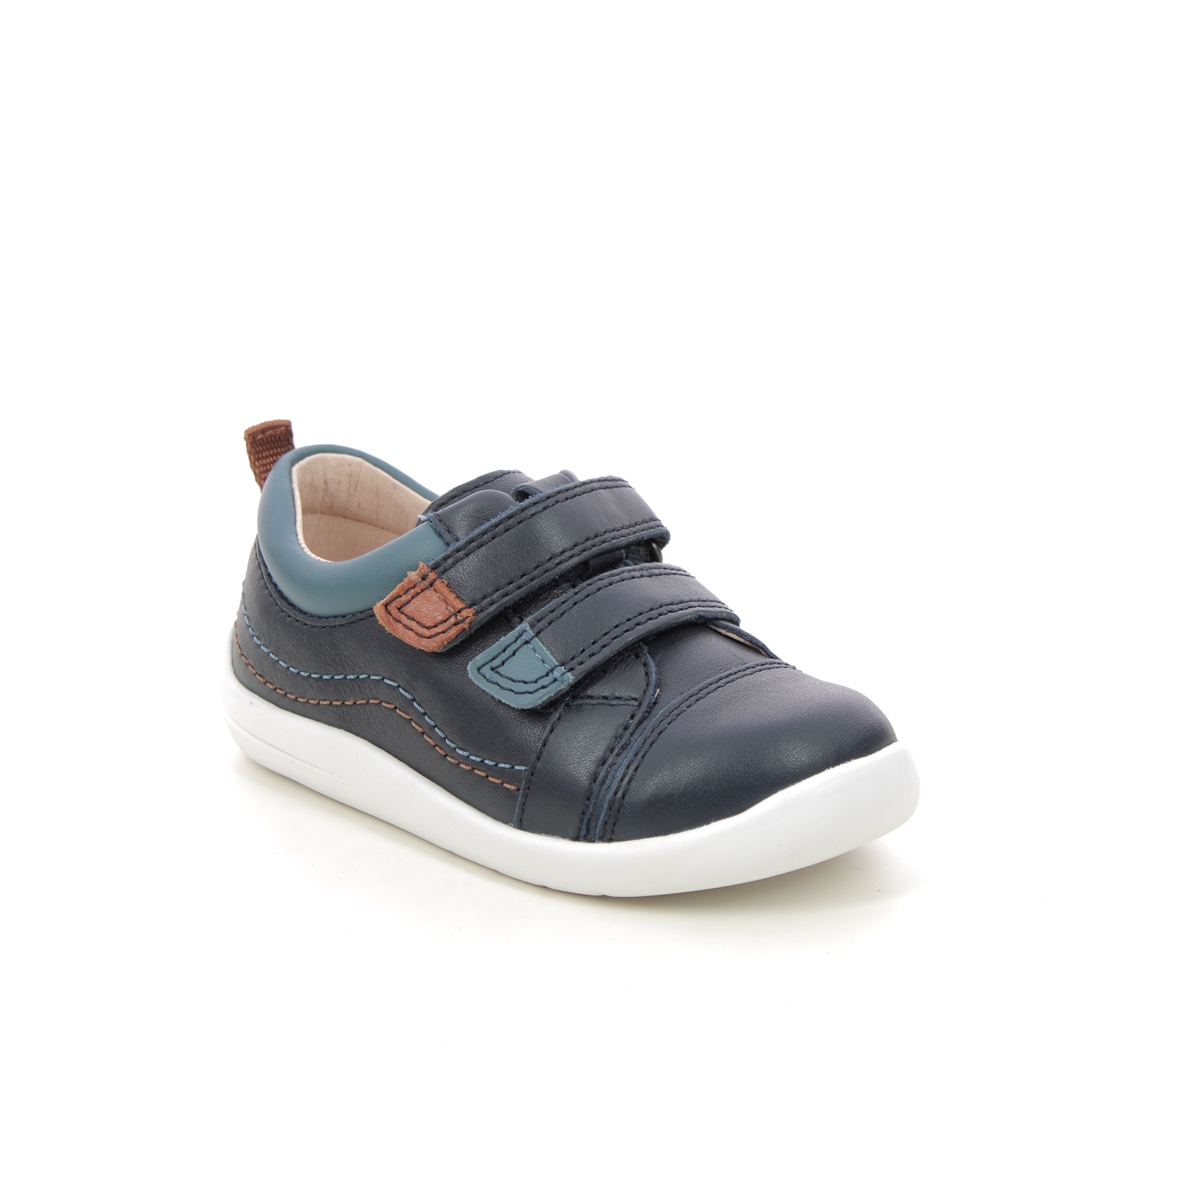 Start Rite - Clubhouse Jojo In Navy Leather 0800-96F In Size 5.5 In Plain Navy Leather Boys First And Toddler Shoes  In Navy Leather For kids